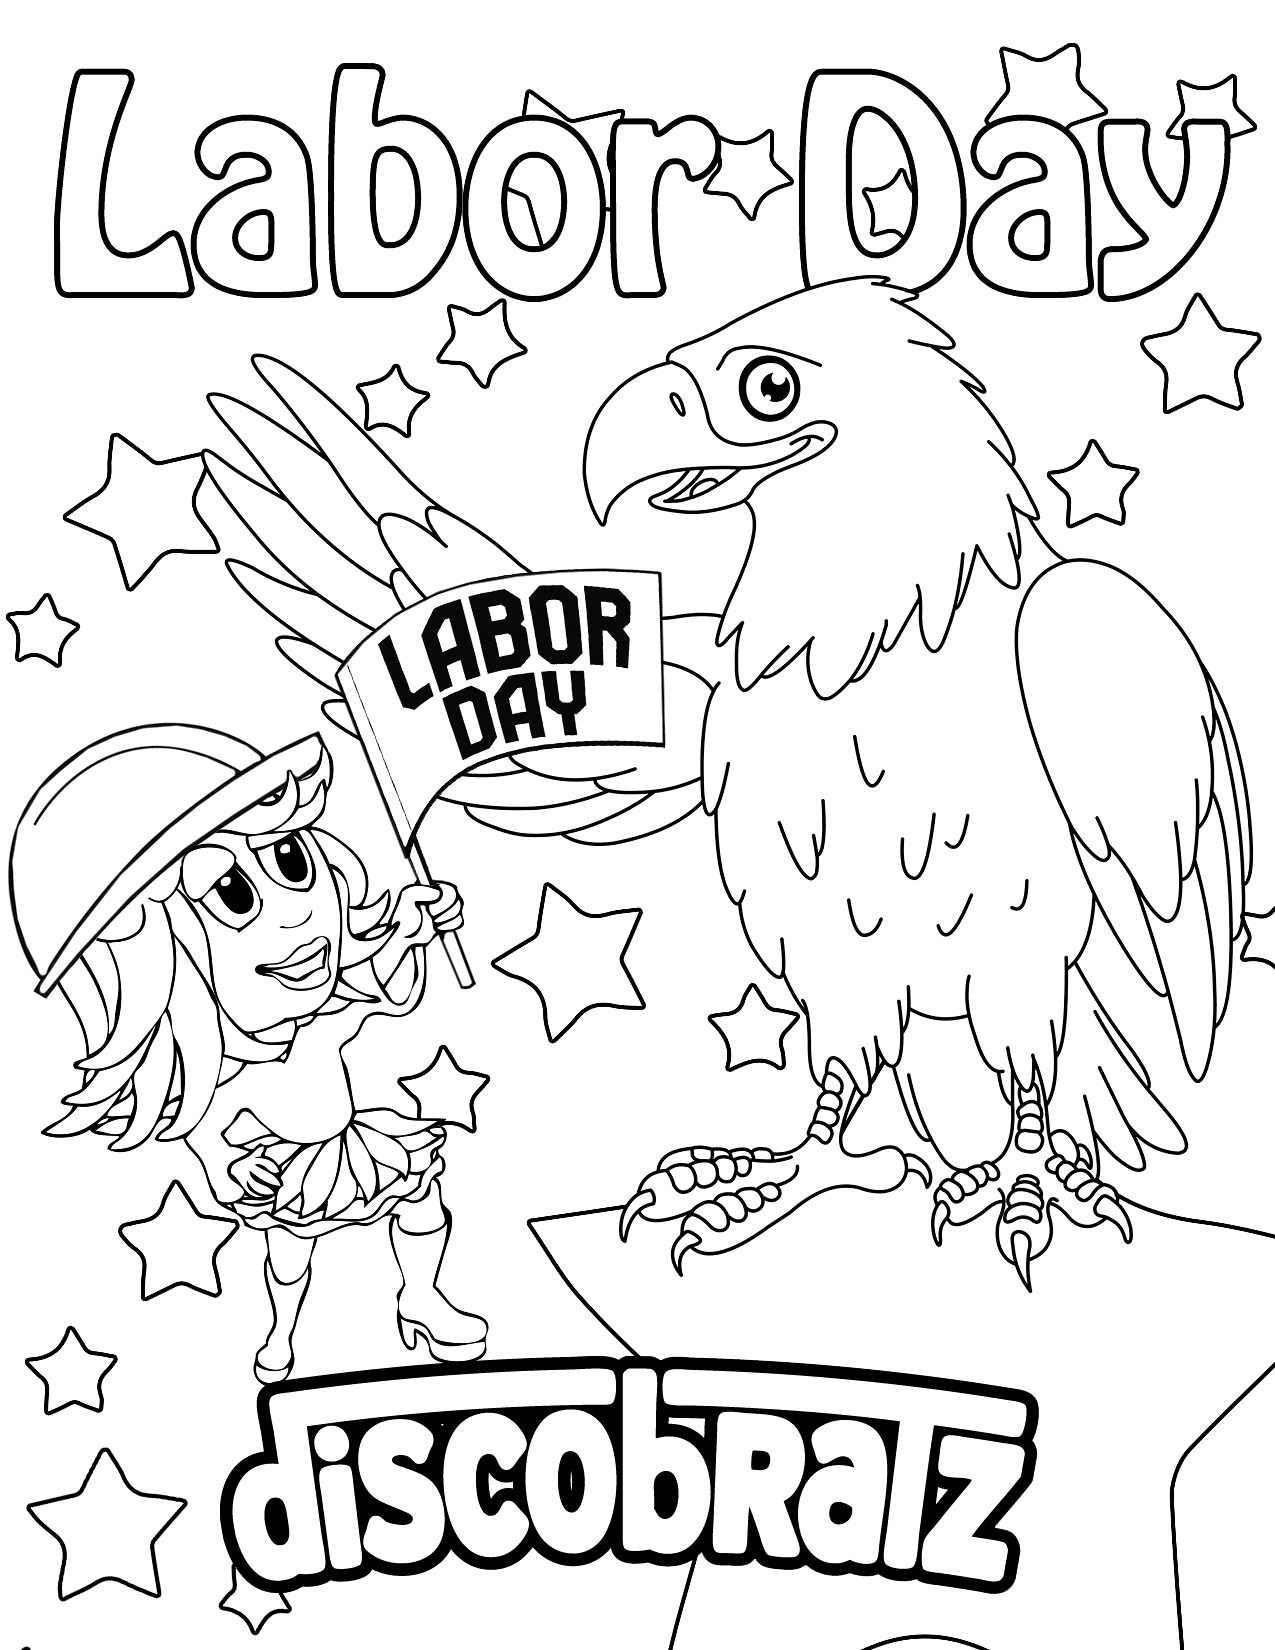 Download DiscoBratz Celebrates the Workers of the World with a Labor Day Coloring Page